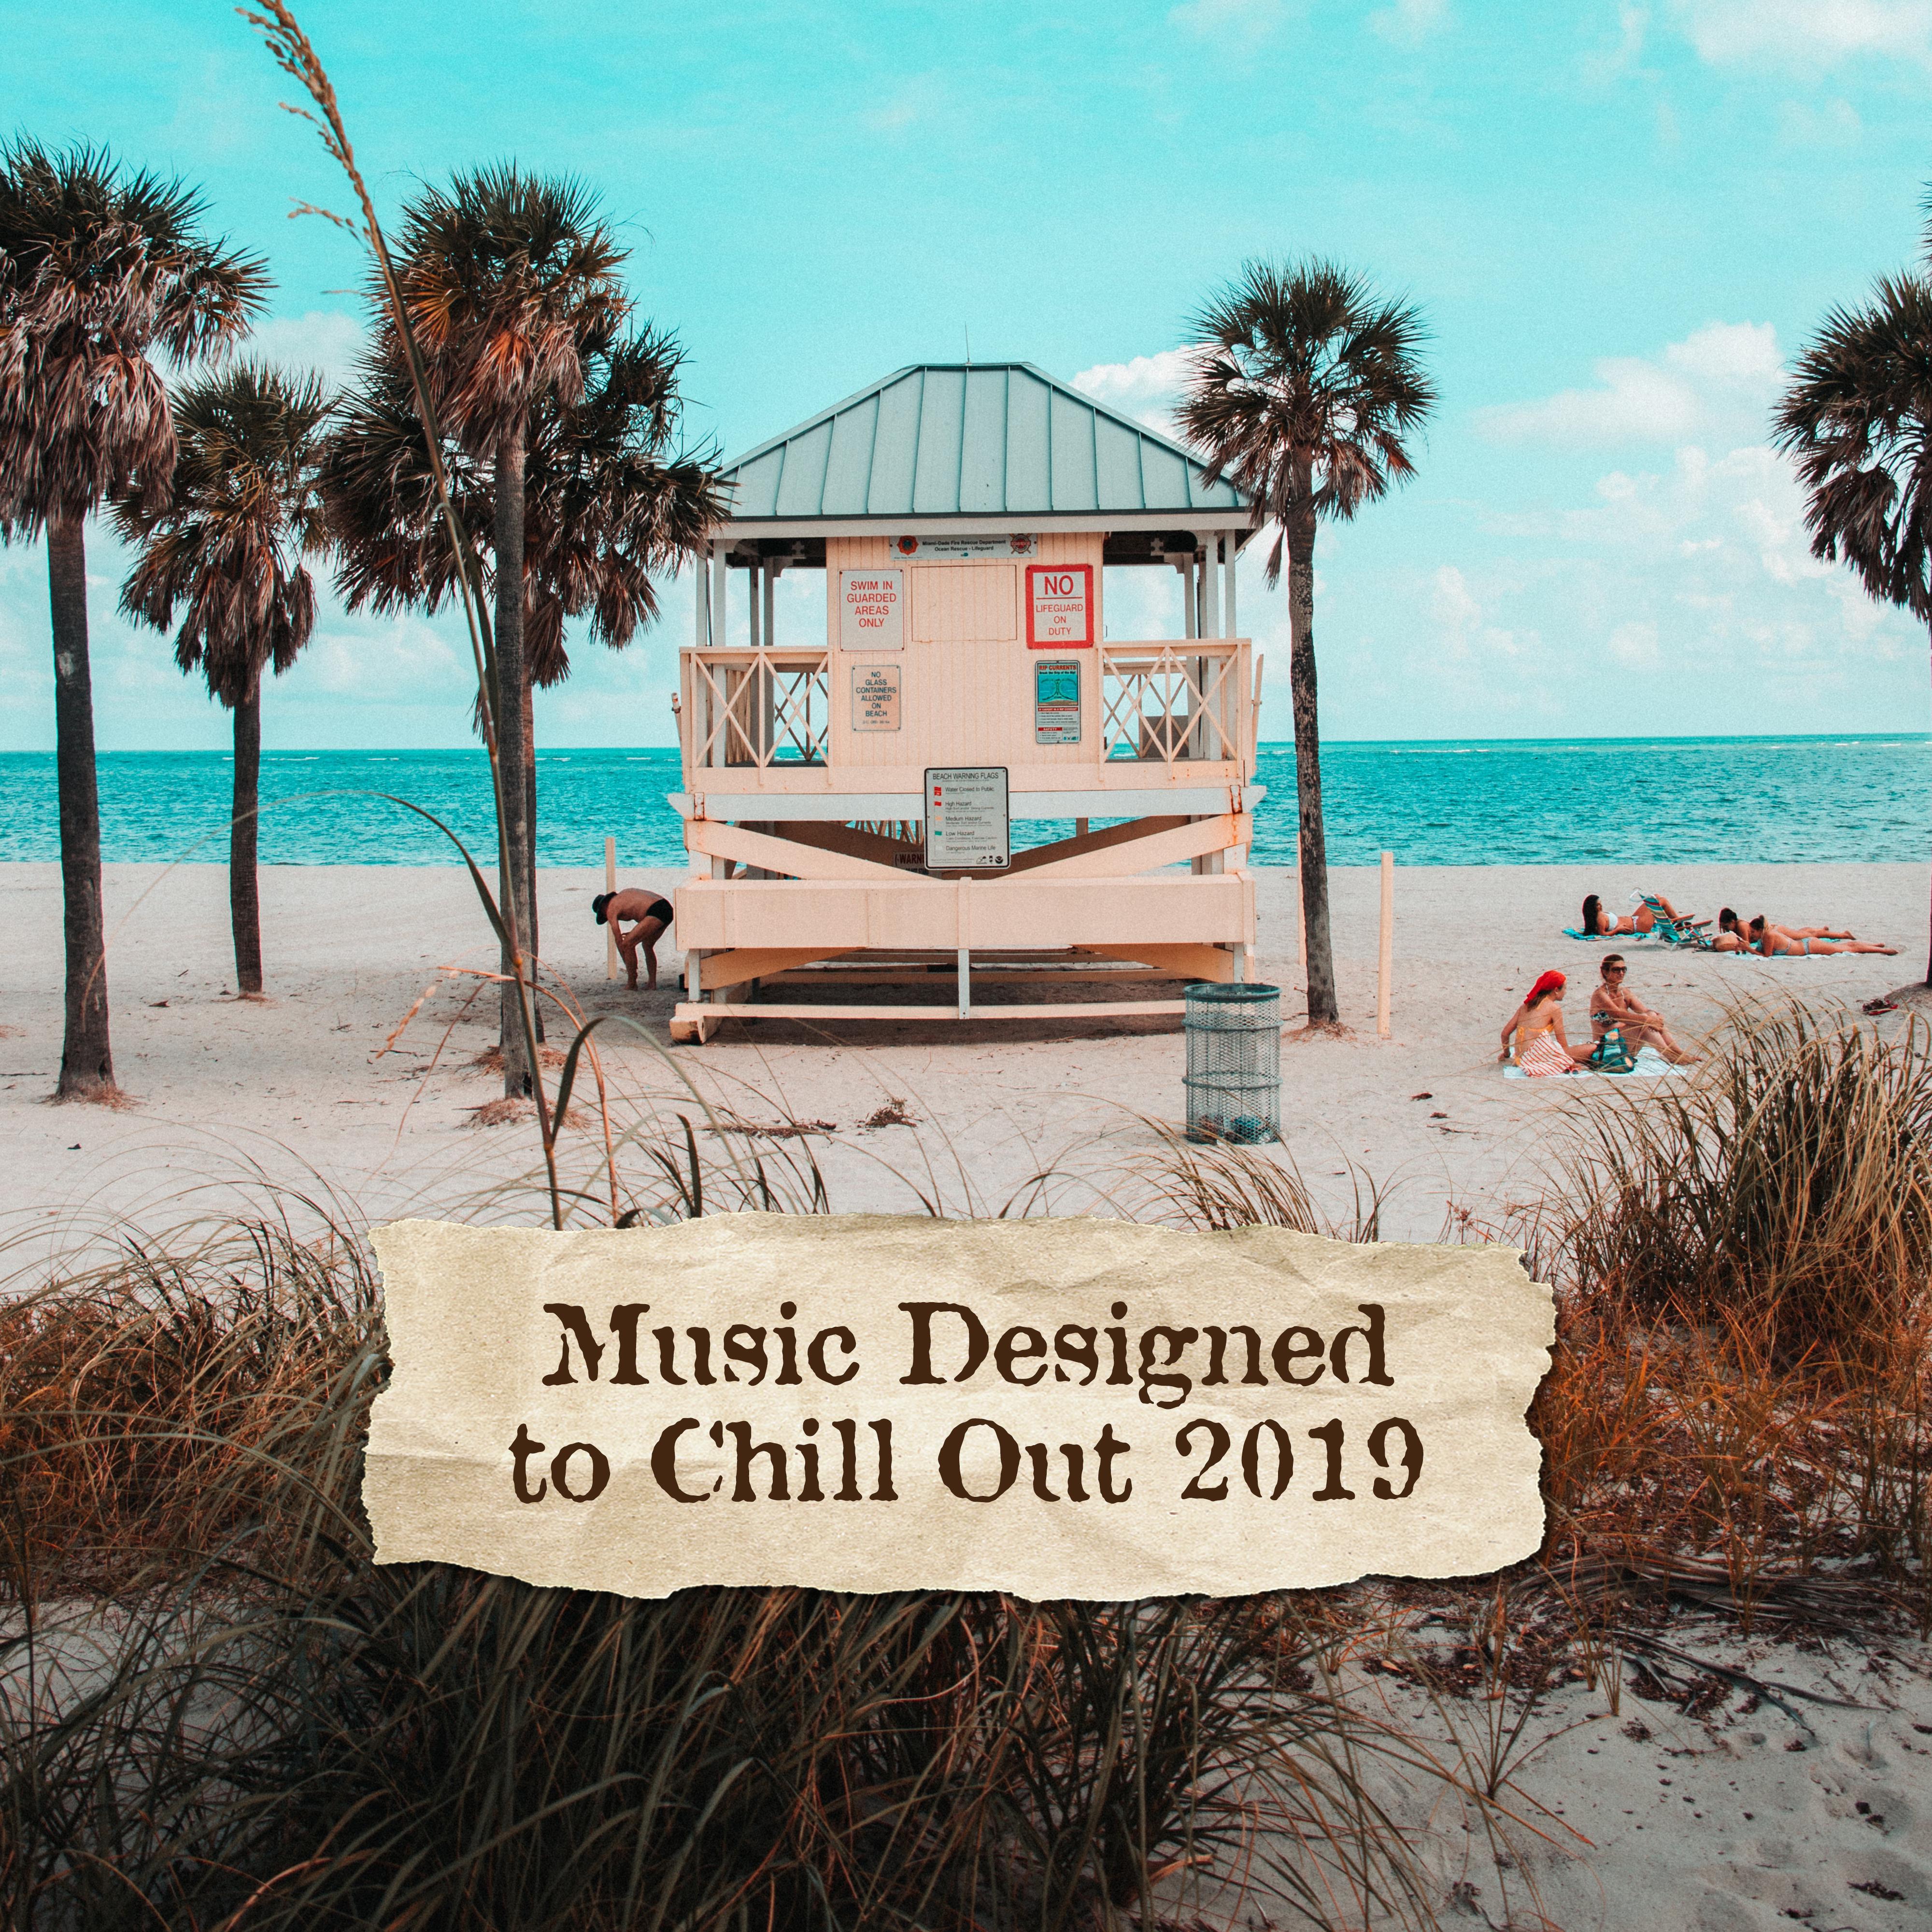 Music Designed to Chill Out 2019